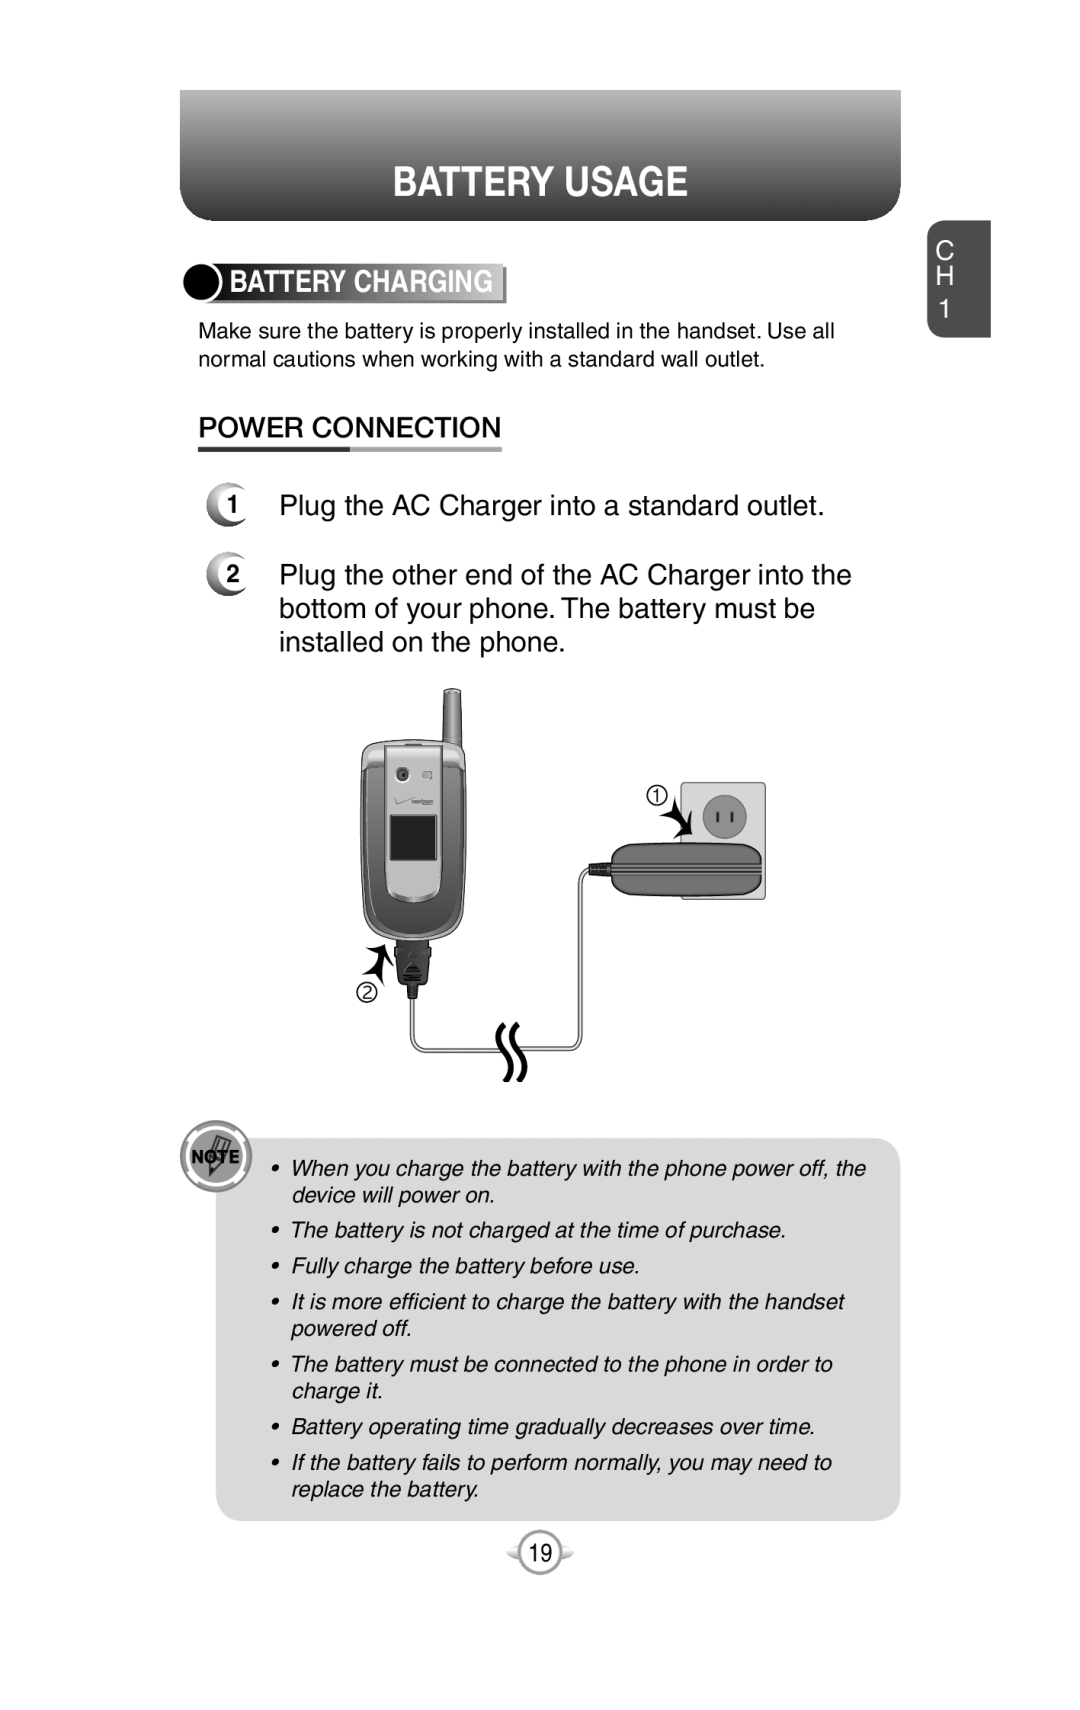 UTStarcom PN-820 Battery Chargingh, Battery Usage, Power Connection, 1Plug the AC Charger into a standard outlet 